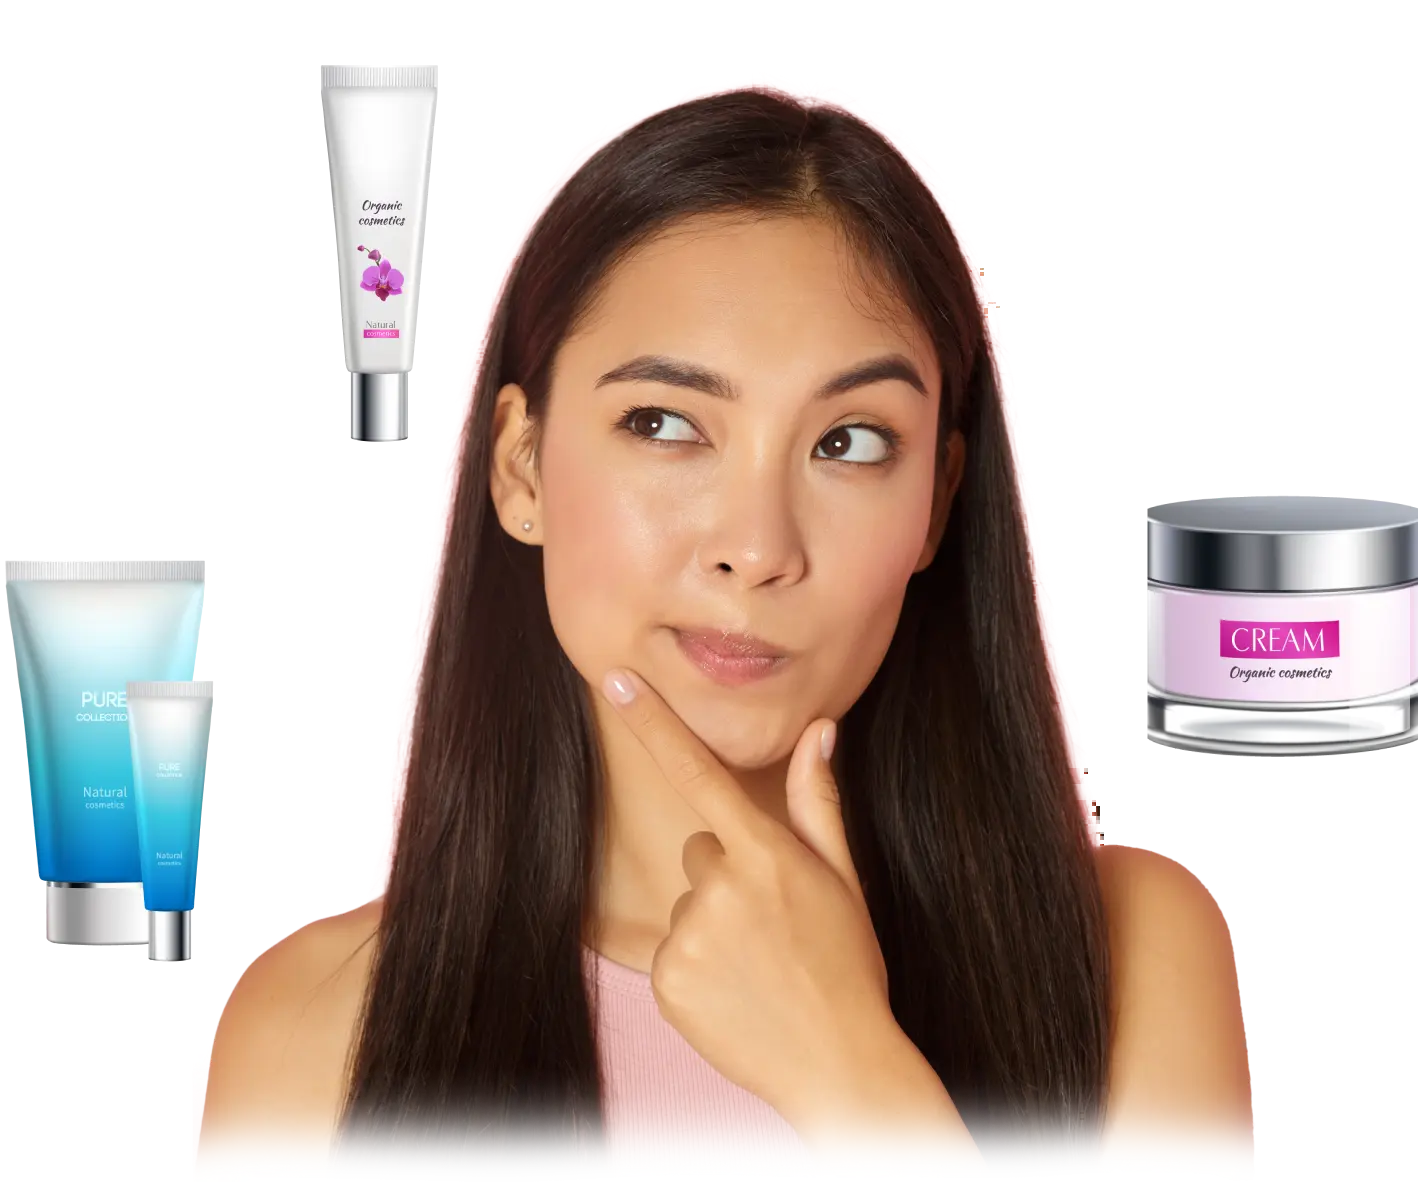 Lady wondering which skincare product to buy